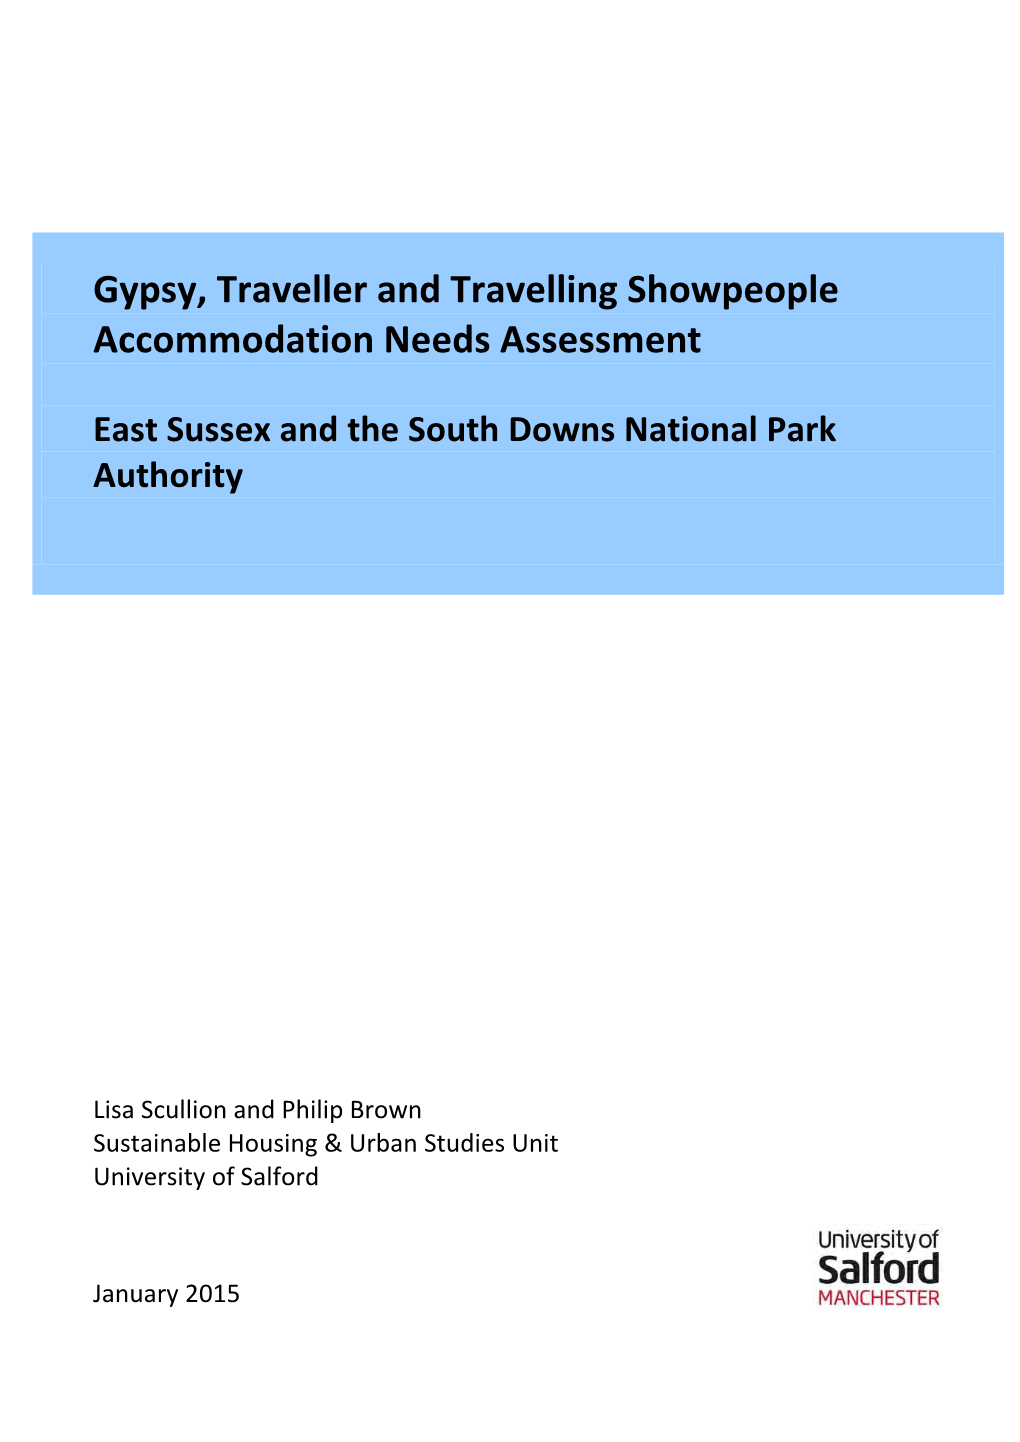 Gypsy, Traveller and Travelling Showpeople Accommodation Needs Assessment